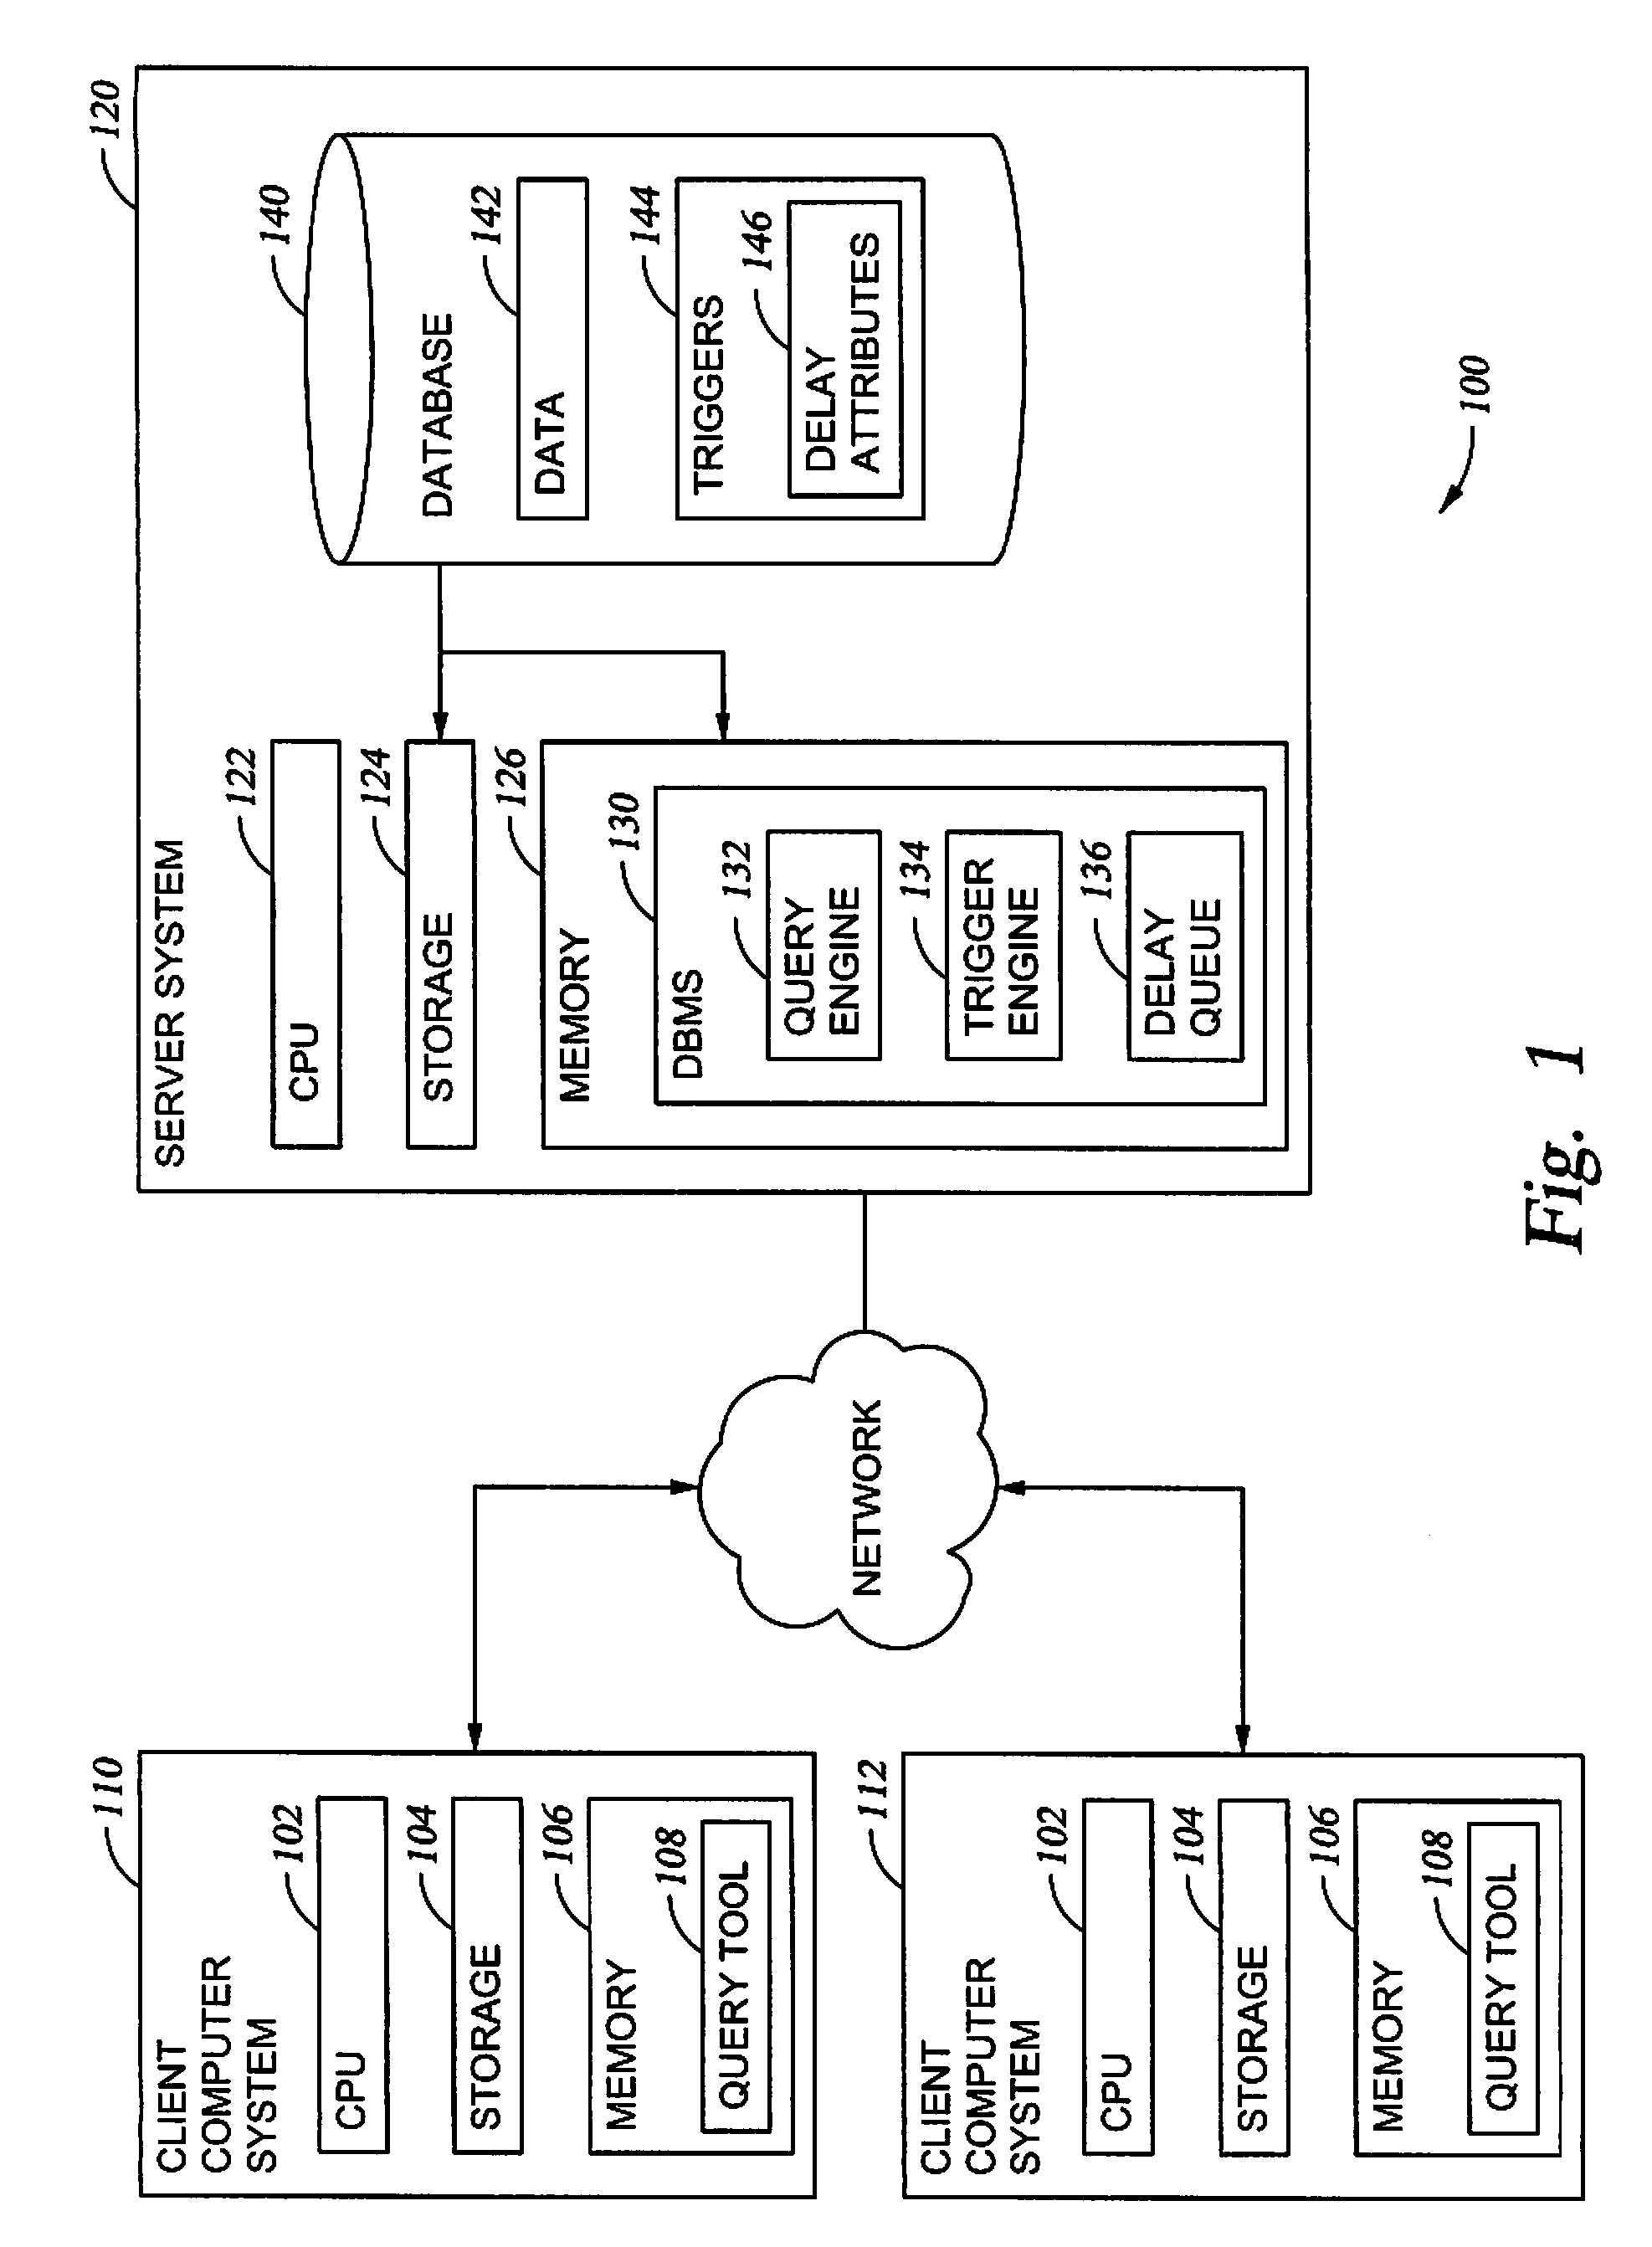 Method and Apparatus for Effecting Database File Performance by Allowing Delayed Query Language Trigger Firing